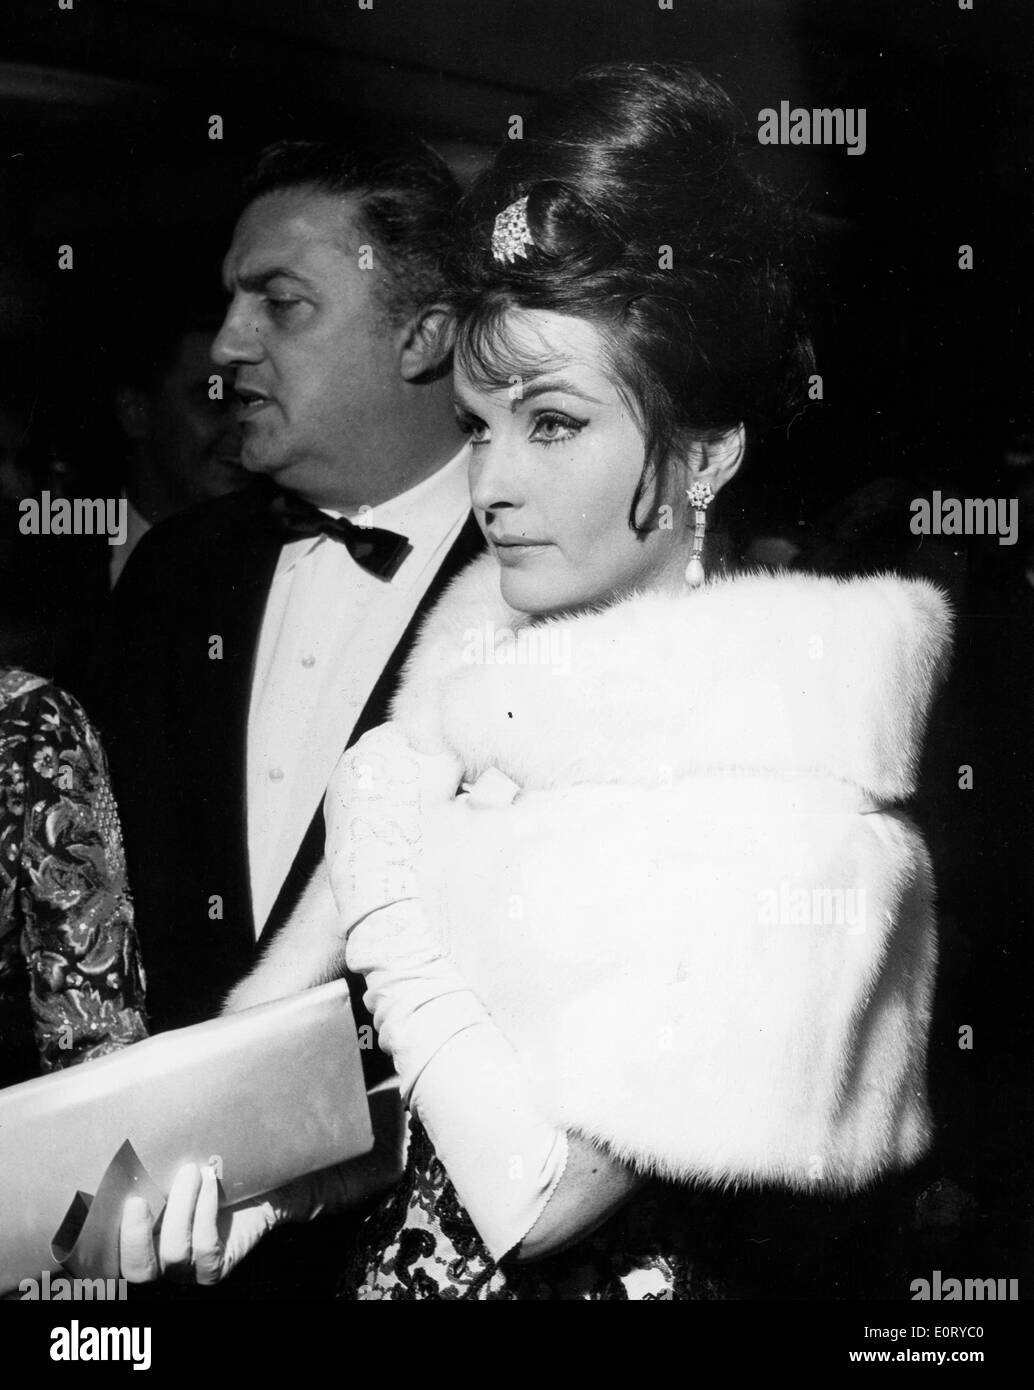 Actress Yvonne Furneaux at event with Federico Fellini Stock Photo